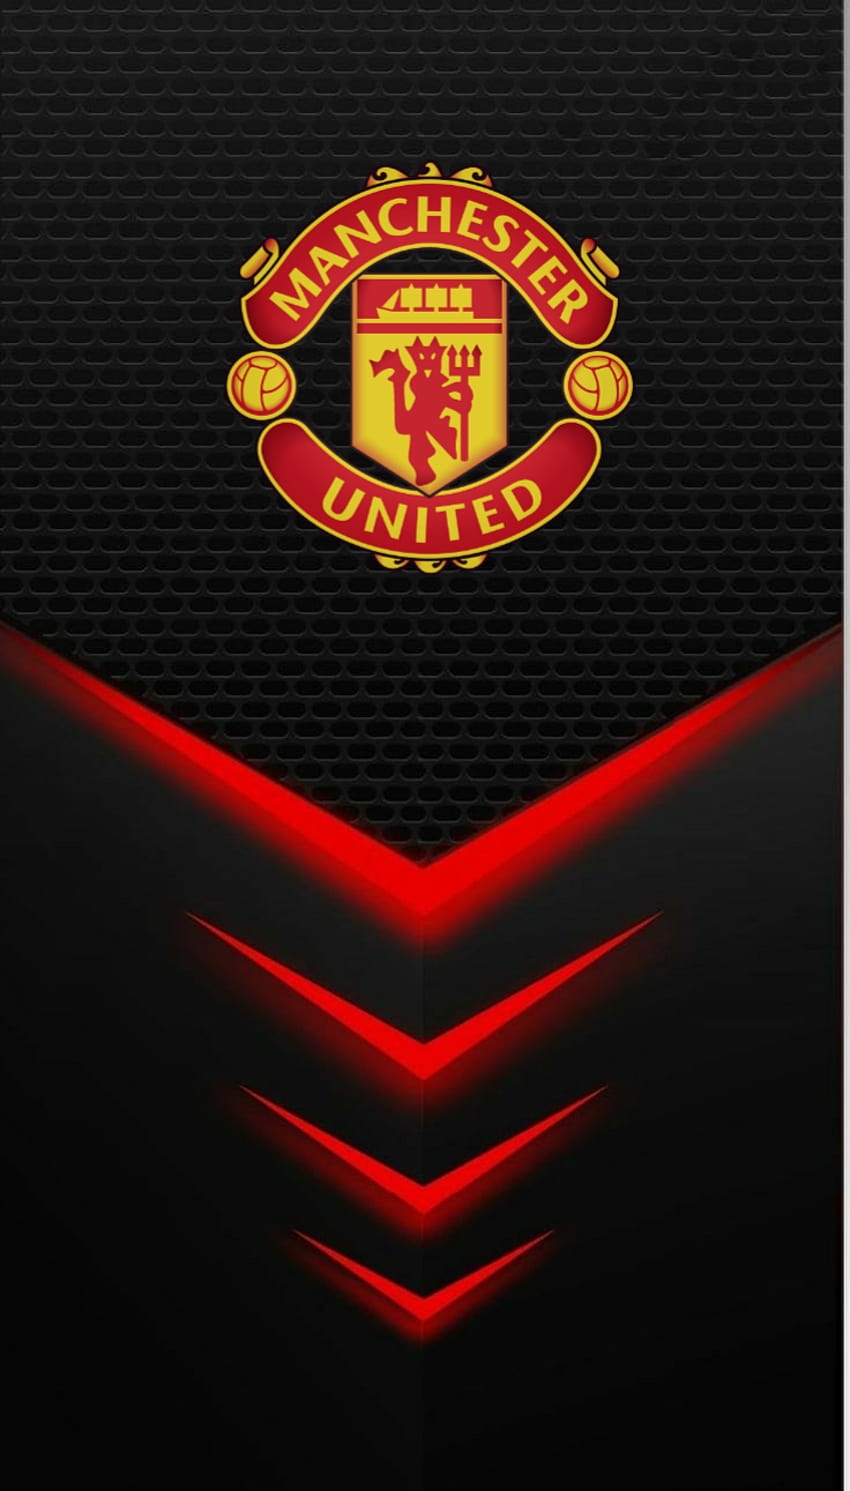 logo iphone manchester united wallpaper ponsel HD